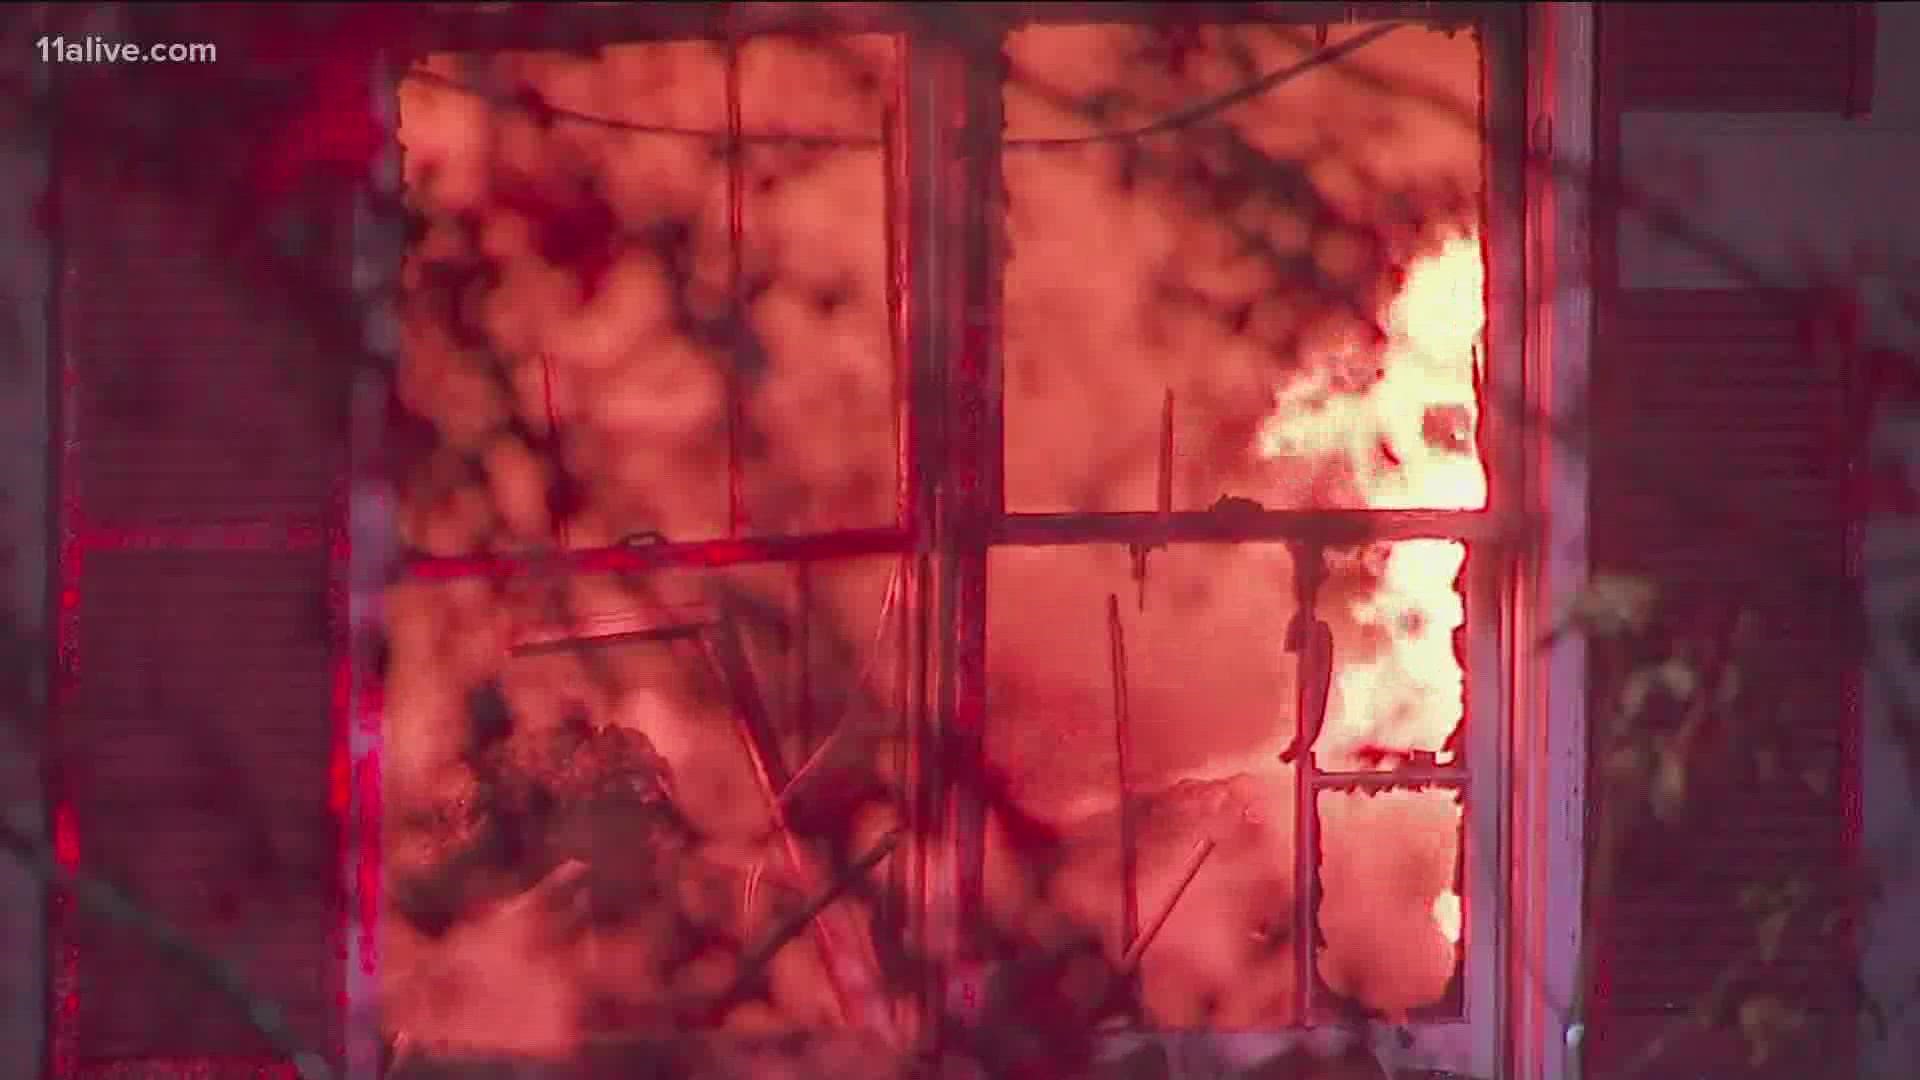 A fire erupted early Friday morning on Holy Cross Drive in Decatur.